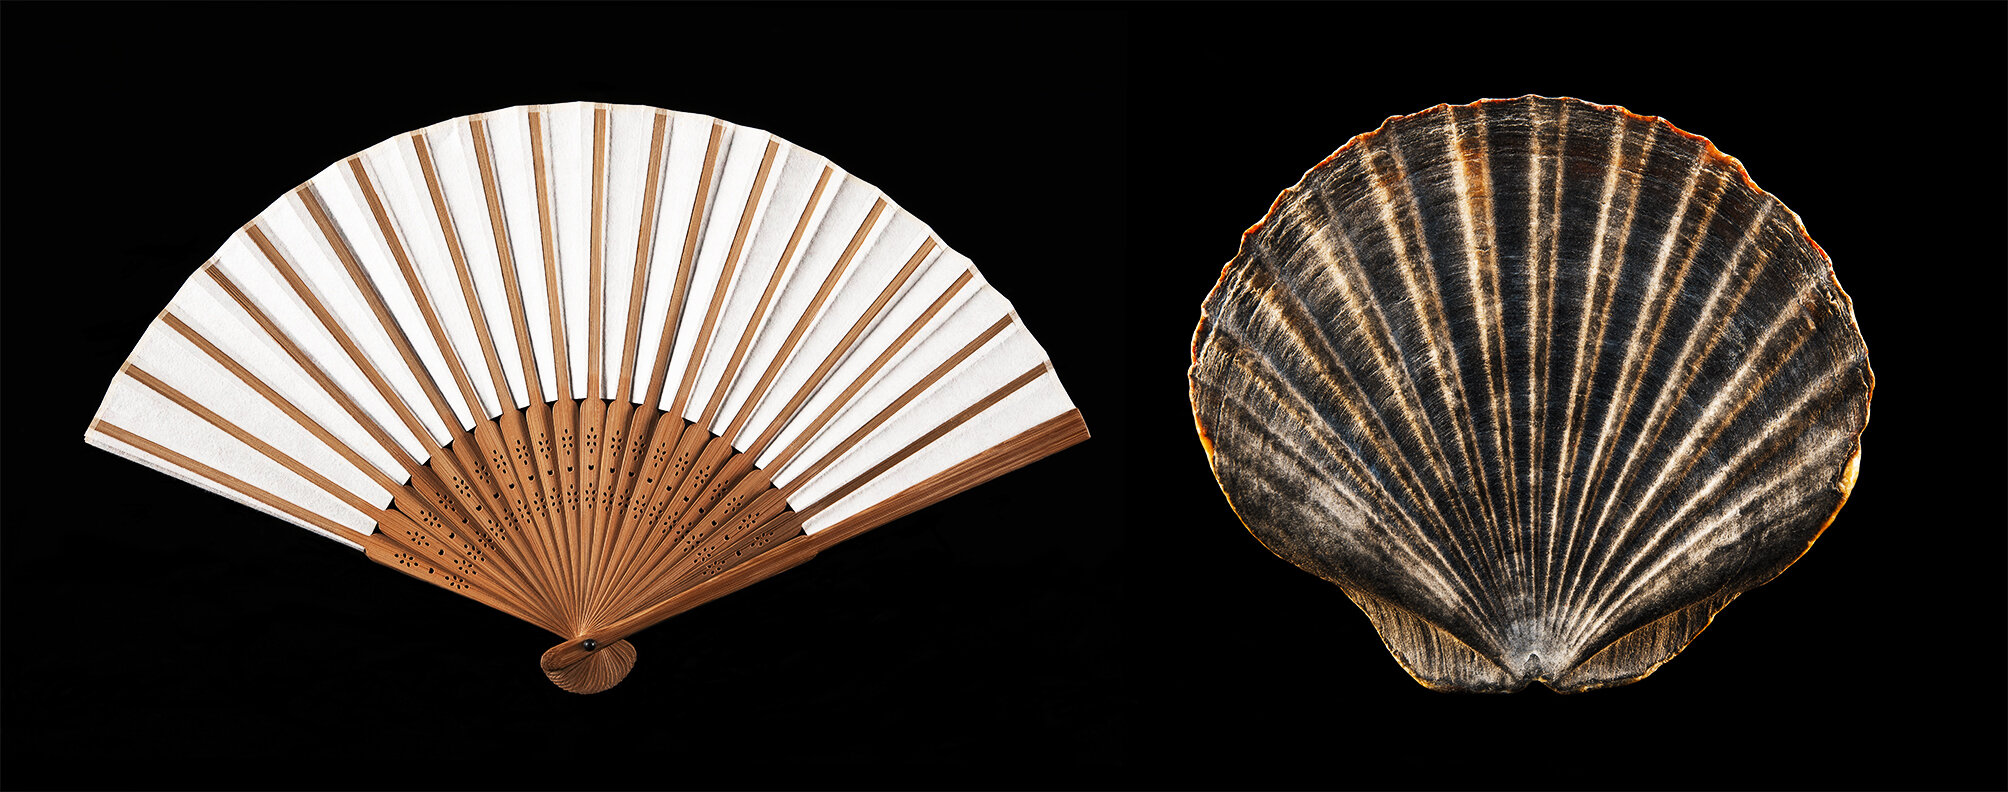   Duologue   The True Story of a Designer's Inspiration  2020 (A Japanese fan &amp; a found seashell)  45cm x 114cm  Archival pigment print on 310gsm cotton rag paper    